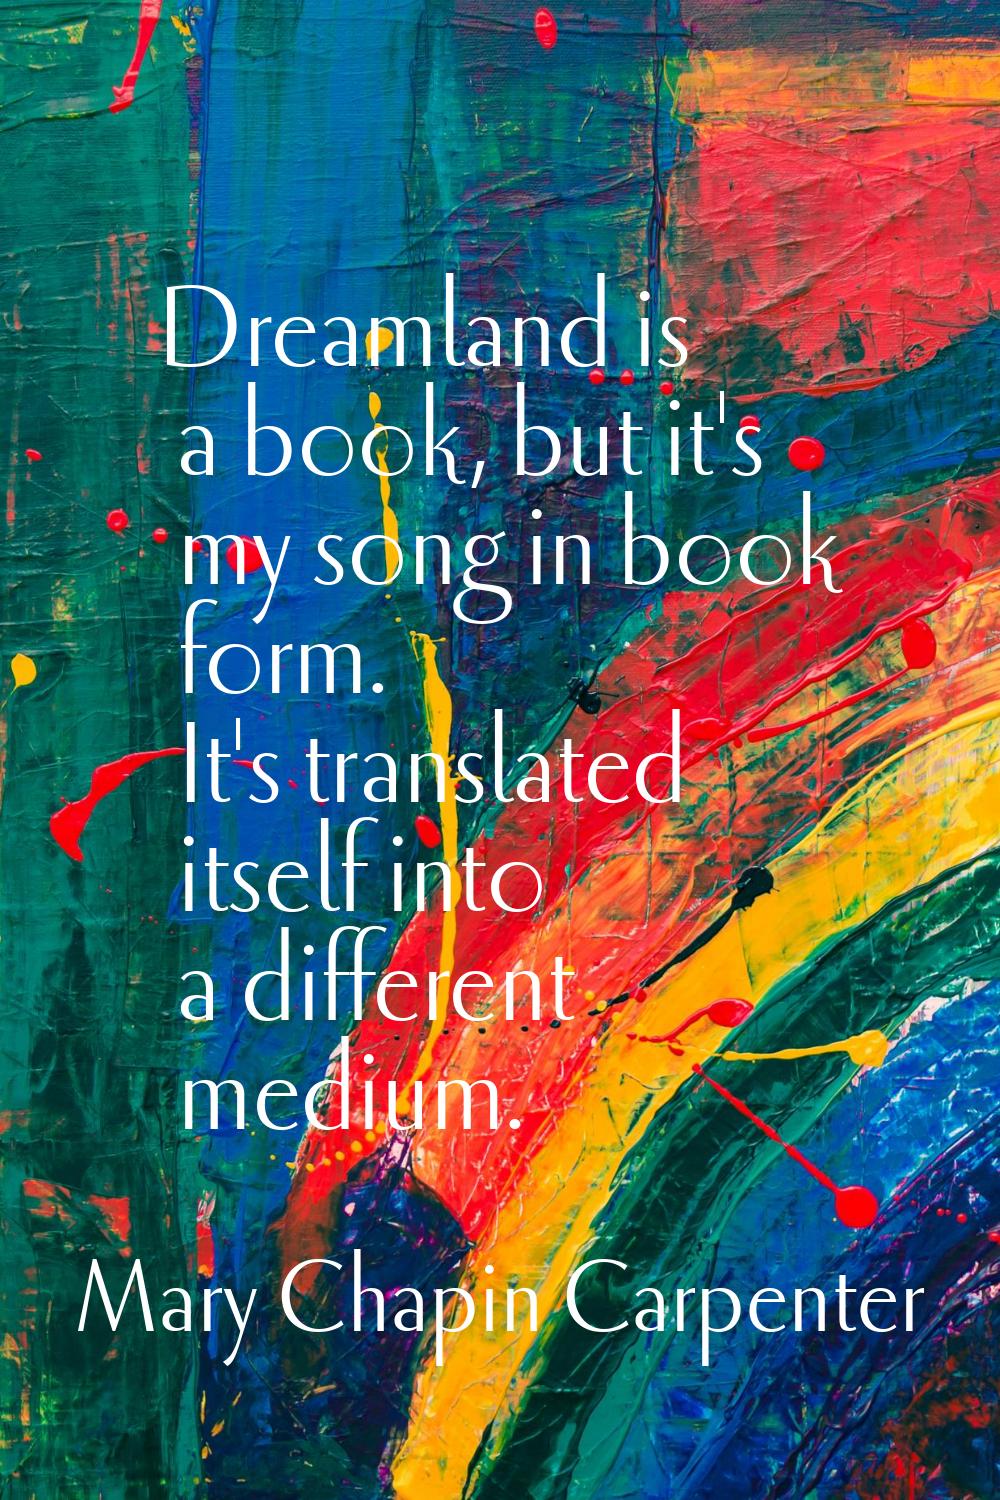 Dreamland is a book, but it's my song in book form. It's translated itself into a different medium.